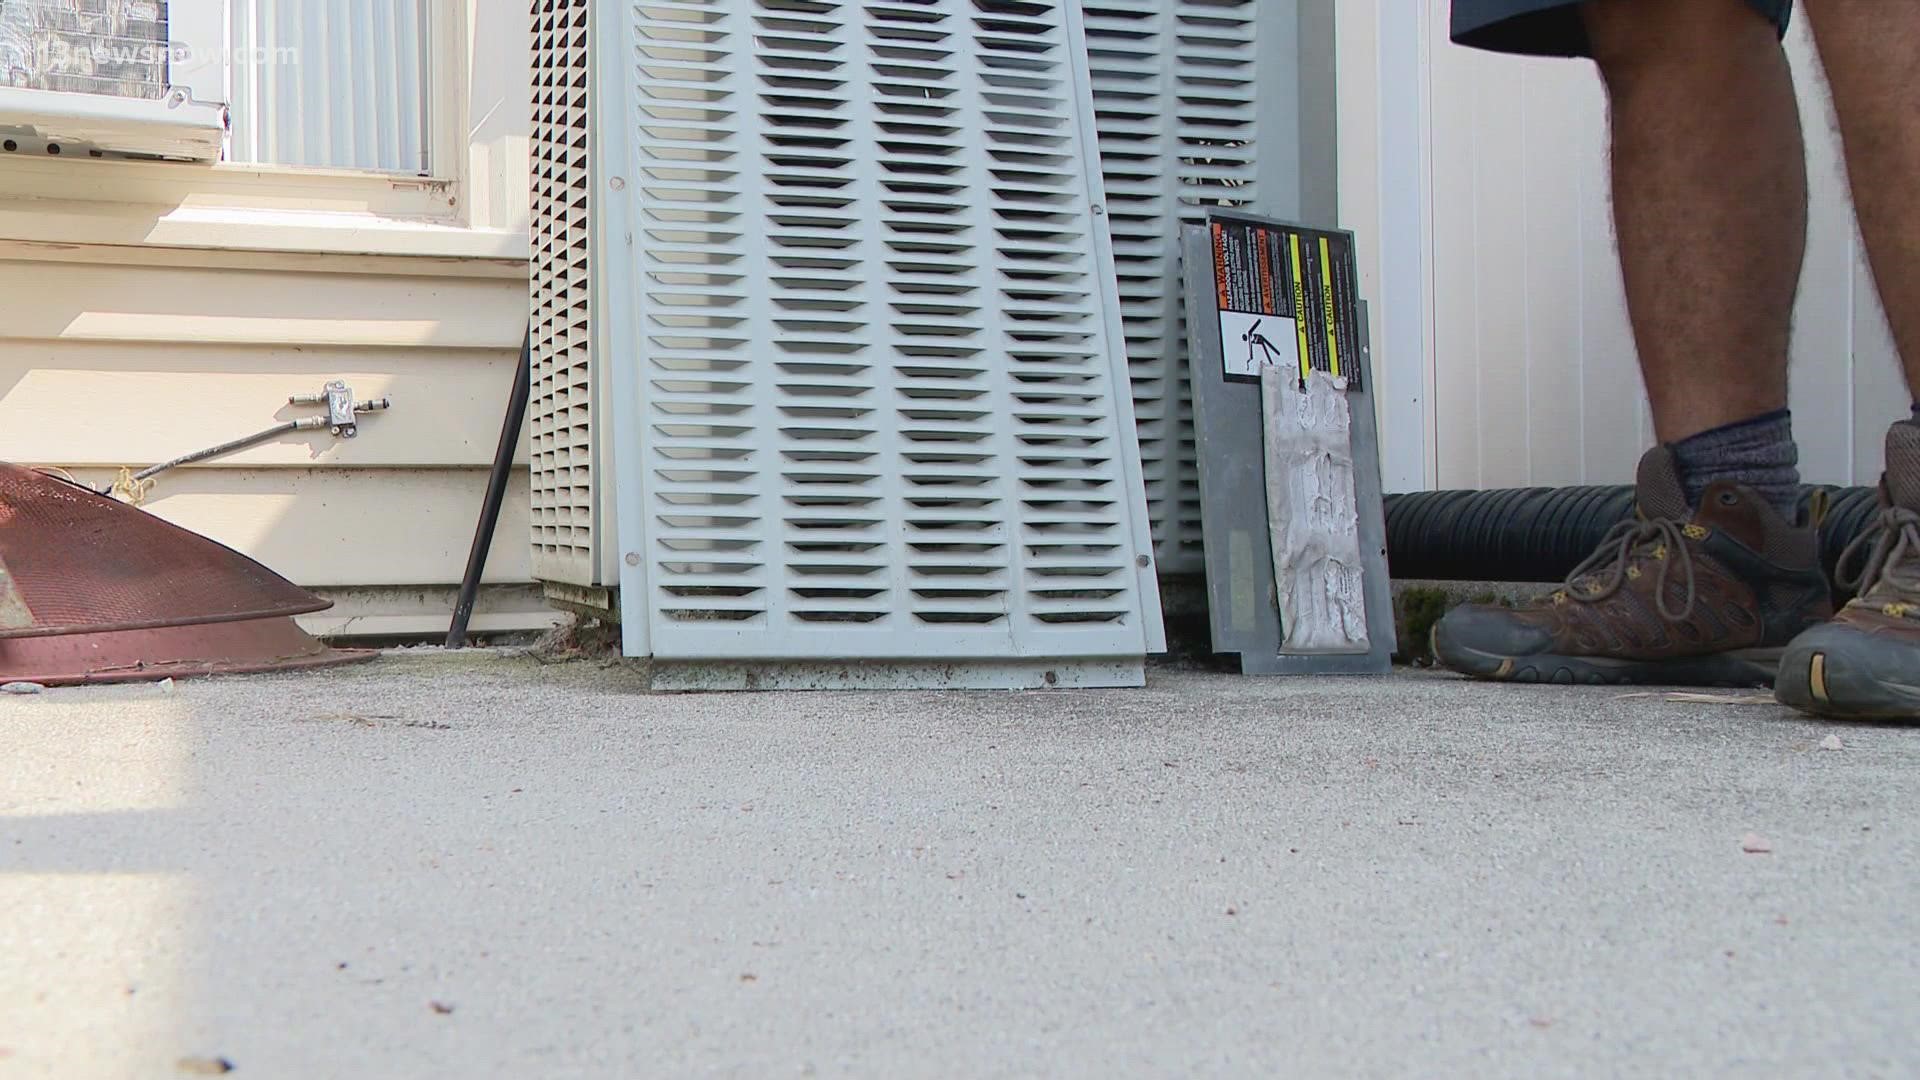 Many Virginia Beach technicians are busy maintaining and repairing air conditioning units due to high temperatures.